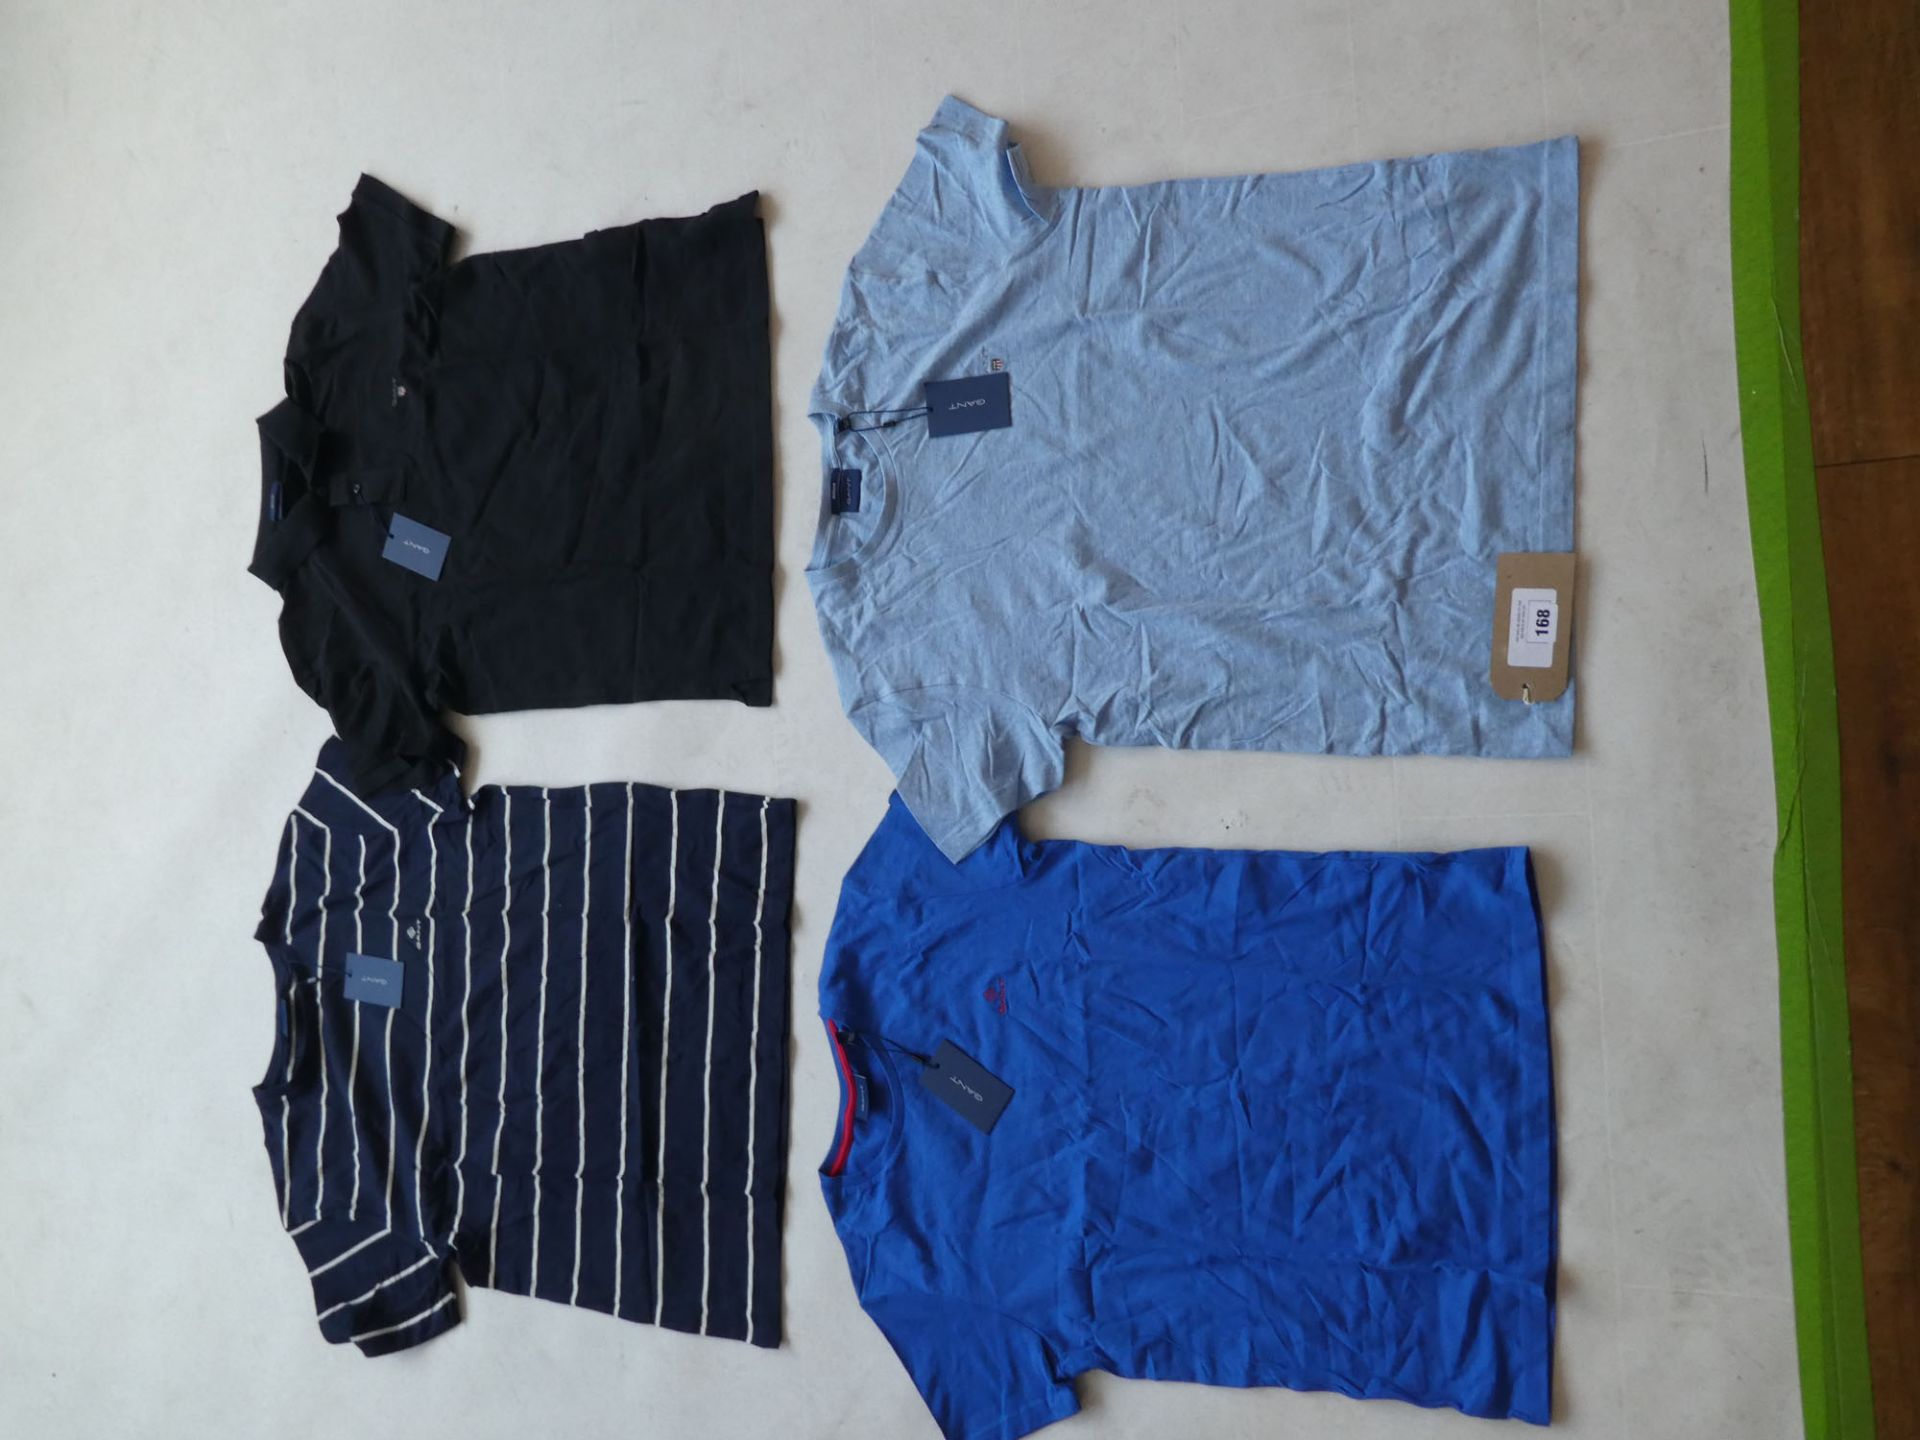 Selection of Gant clothing to include tops and polo sizes M, L and XL